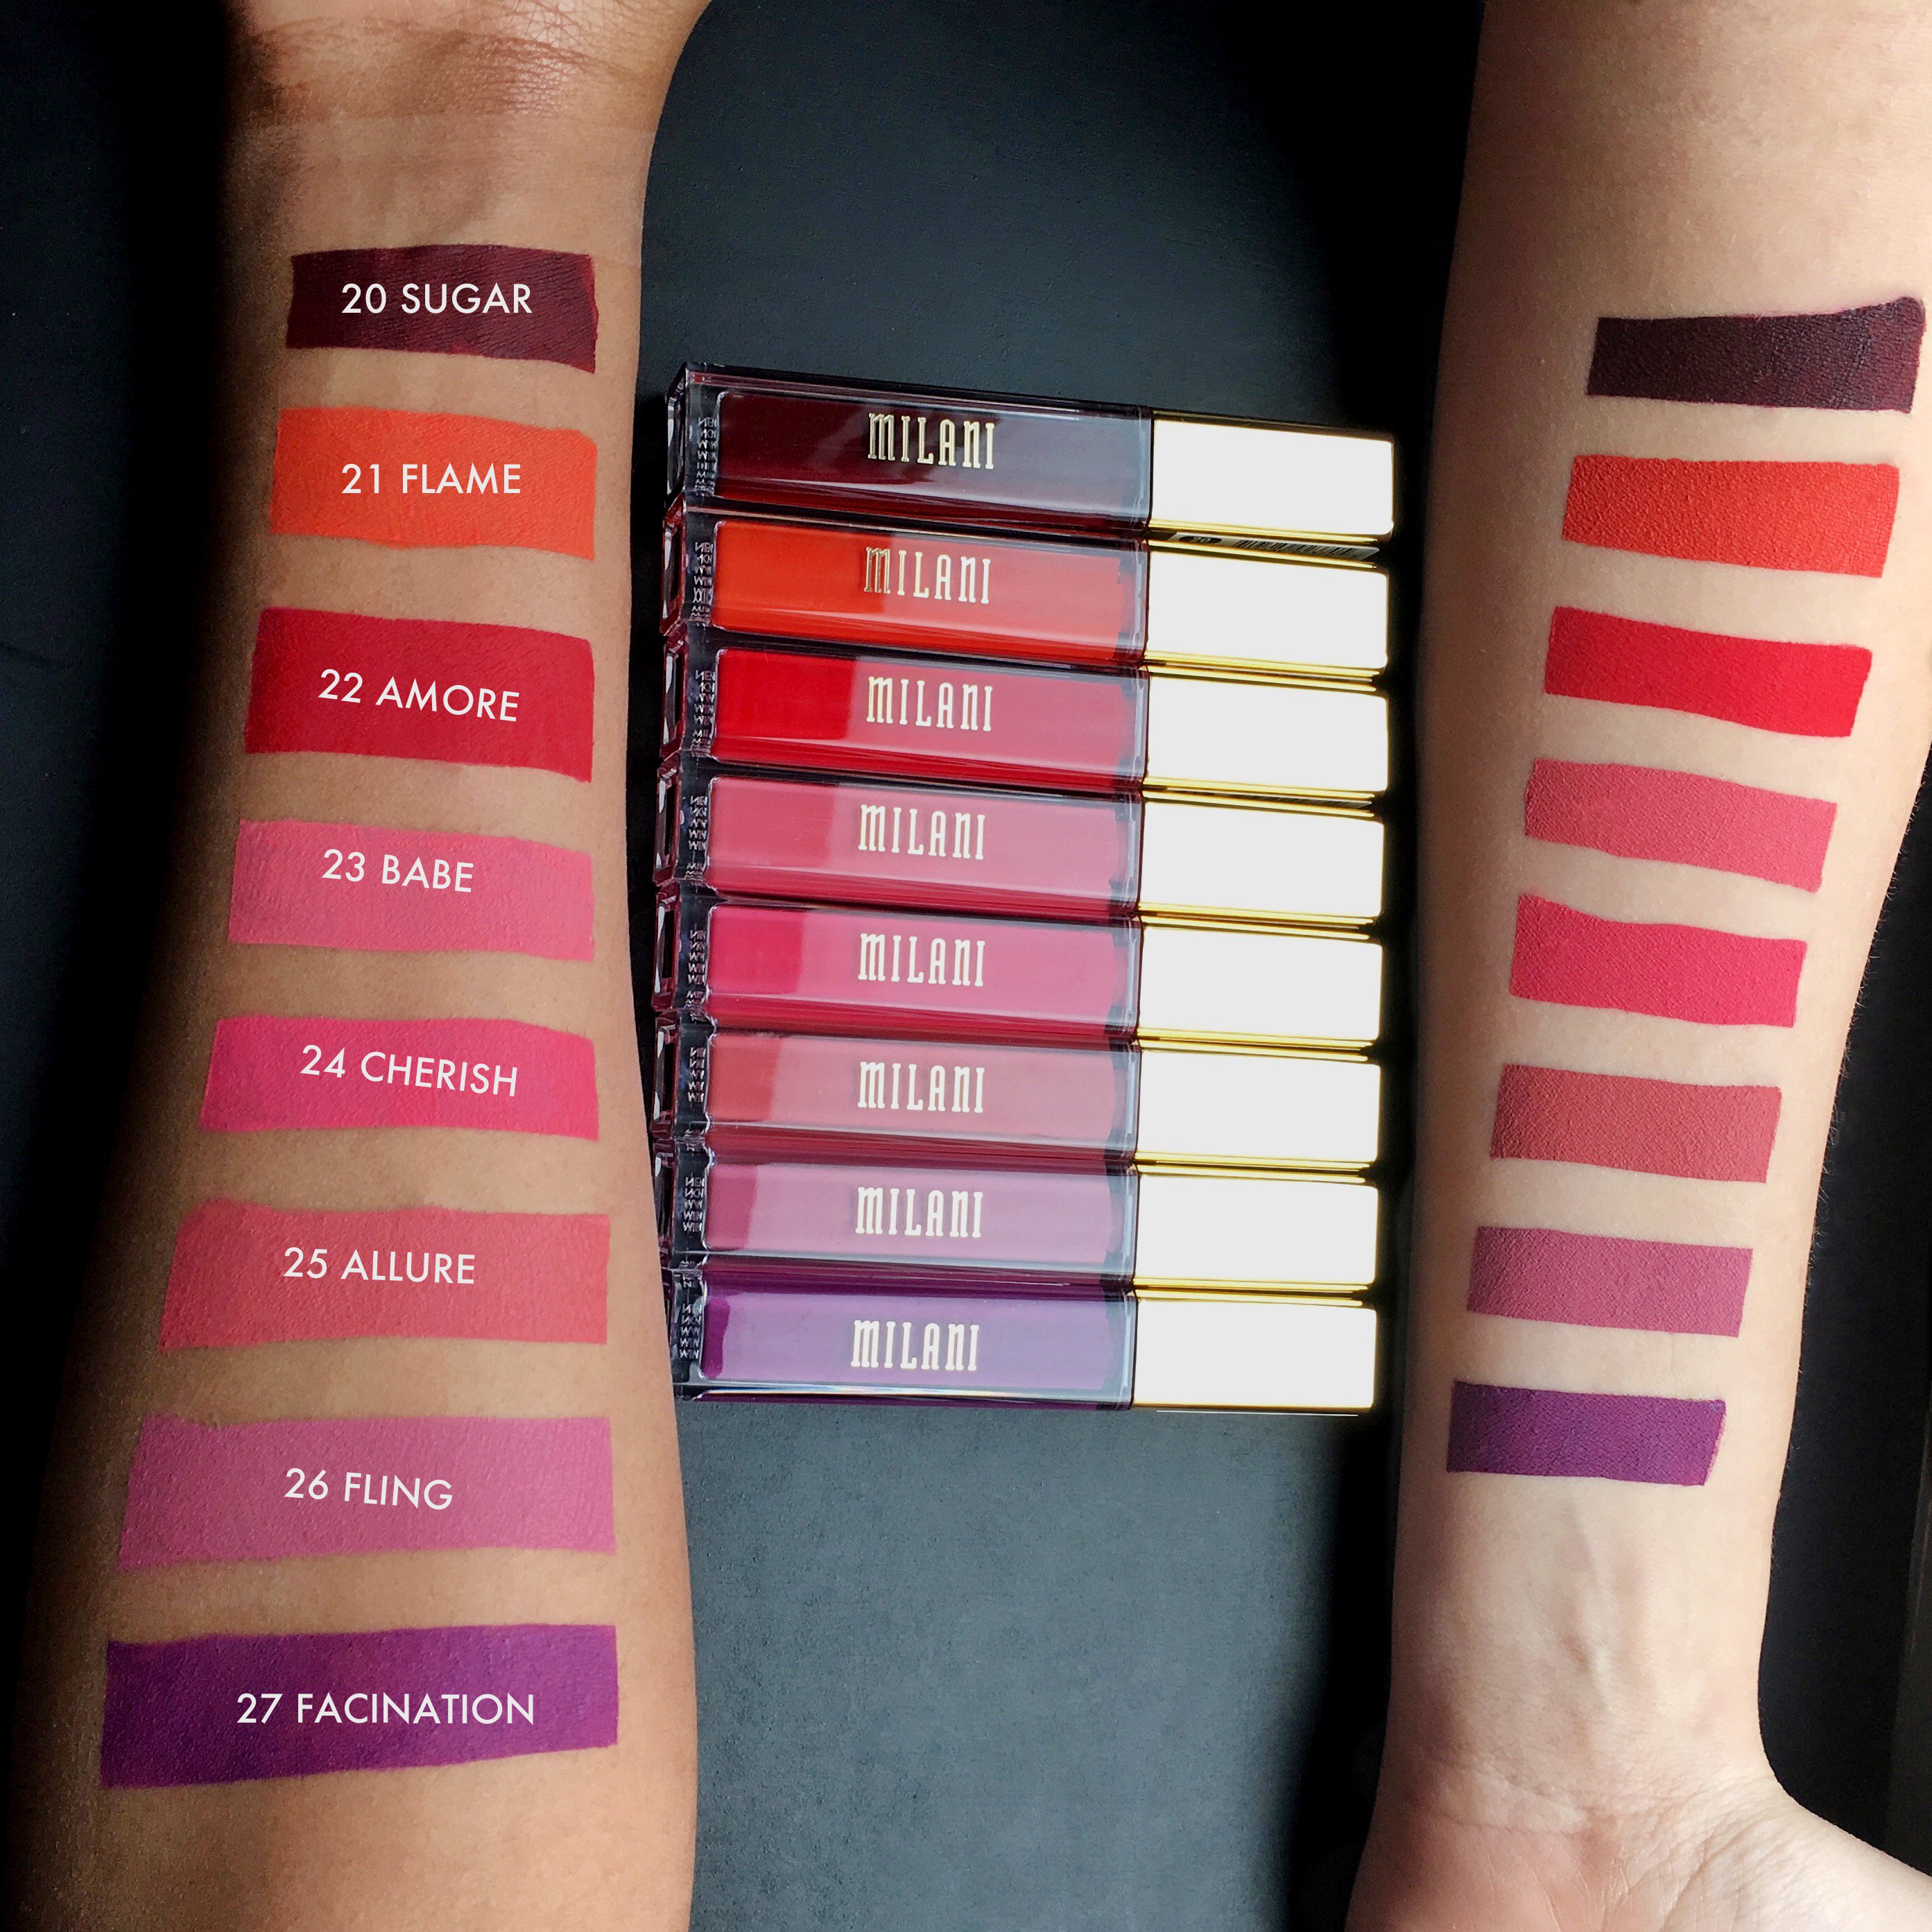 levenslang voorraad cocaïne Milani Cosmetics on Twitter: "Eight new Amore Matte Lip Crème shades have  just been released on our website. Buy now: https://t.co/6c0sUJDY9x  https://t.co/5XYs8V6i5K" / Twitter